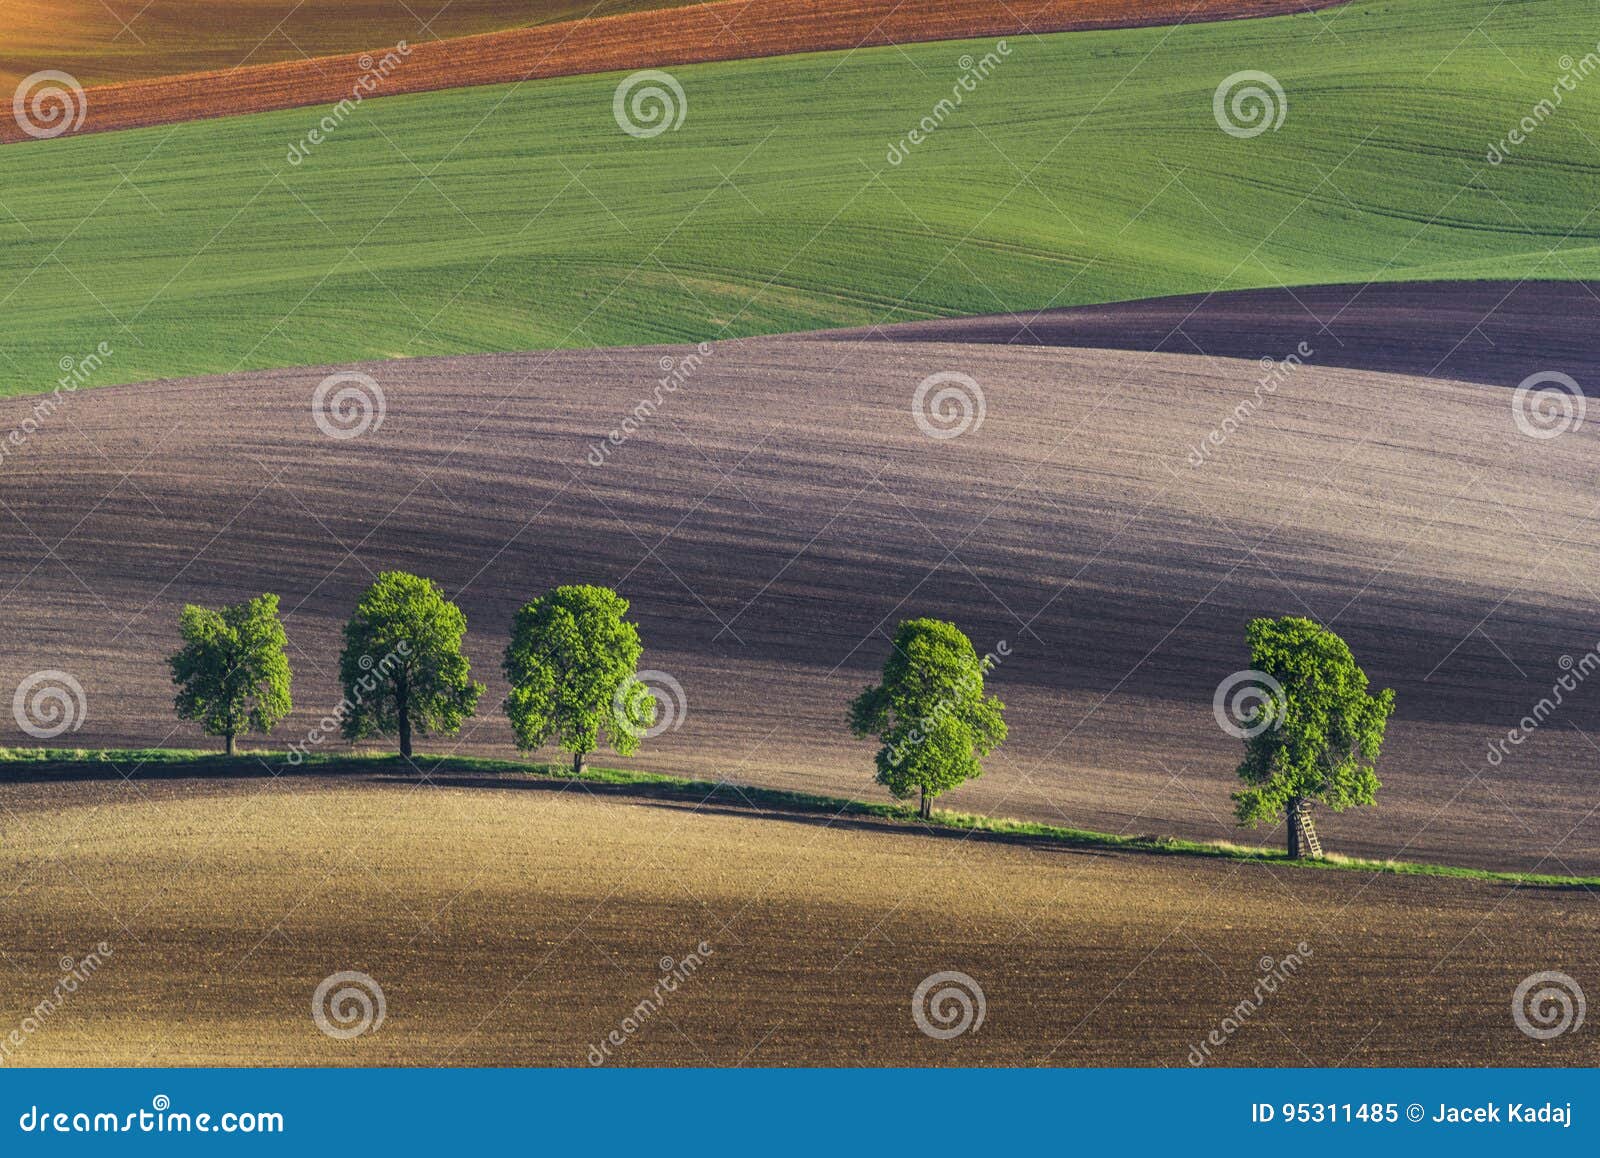 five lonely trees on wavy fields, south moravia